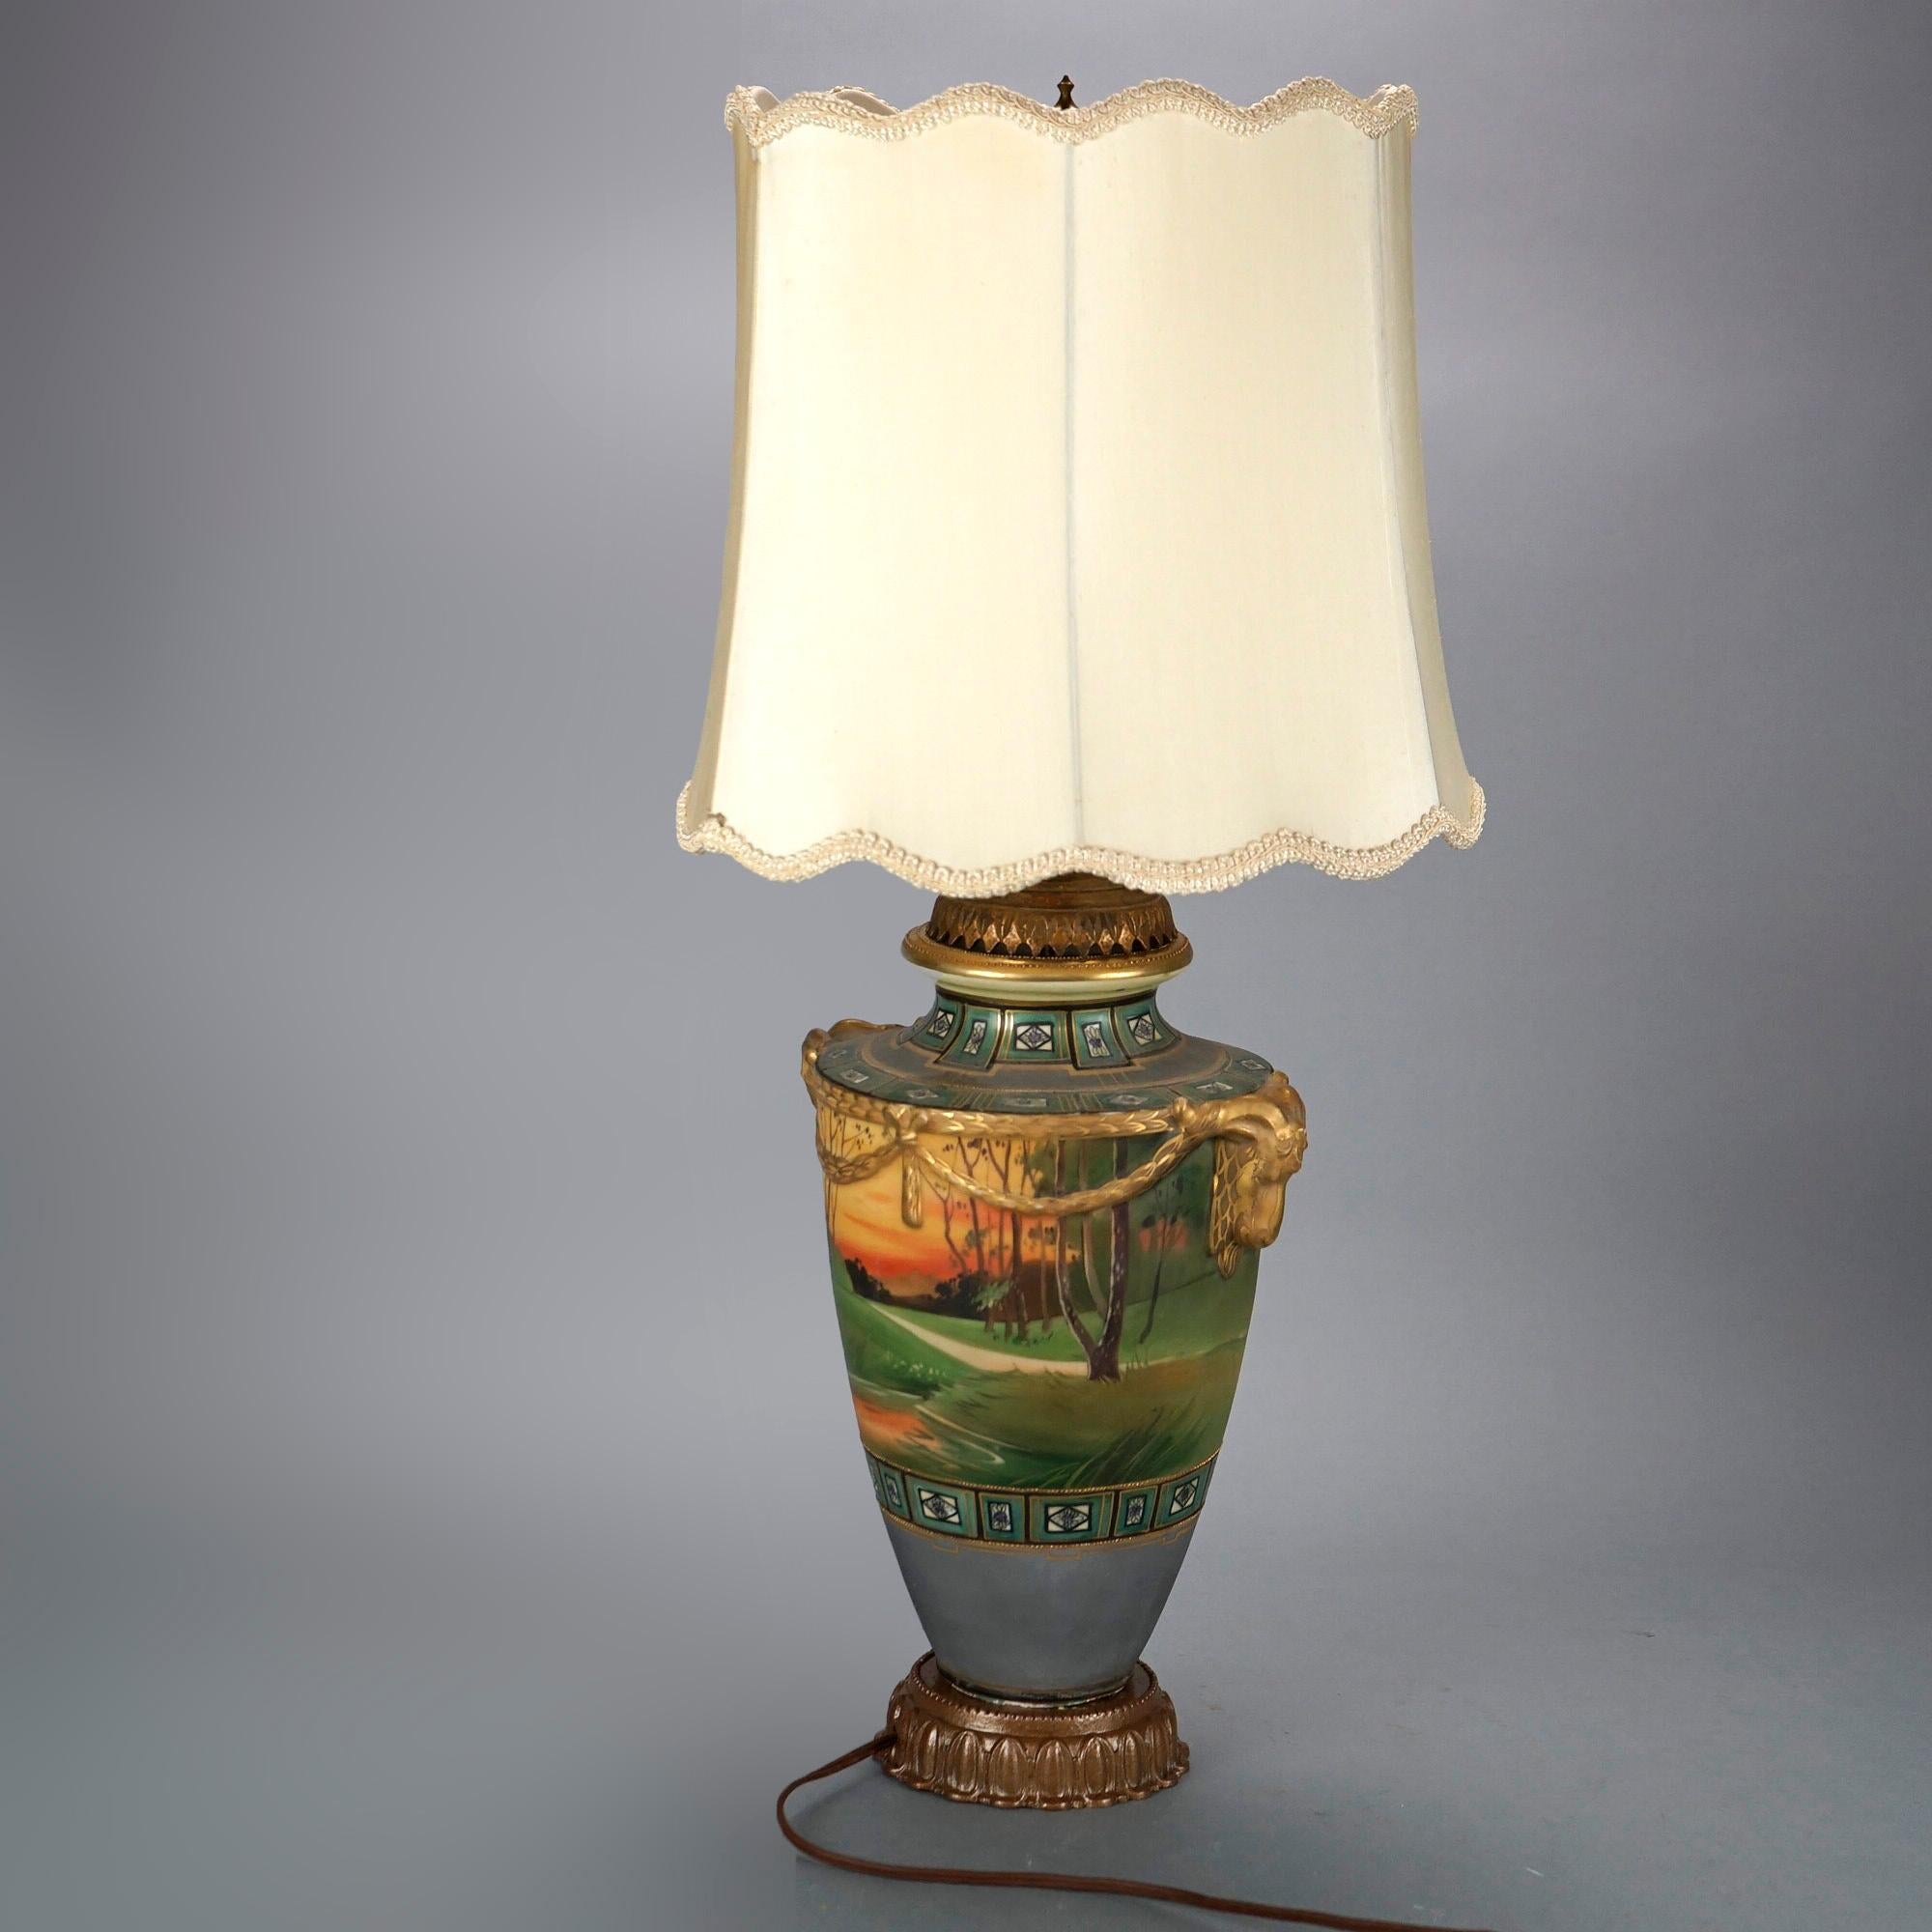 An antique table lamp offers Japanese Nippon urn form base with hand painted scenic decoration, double ram form handles and gilt highlights throughout, raised on foliate cast base, c1920

Measures- 26.75'' H x 12.25'' W x 12.25'' D.

Catalogue Note: